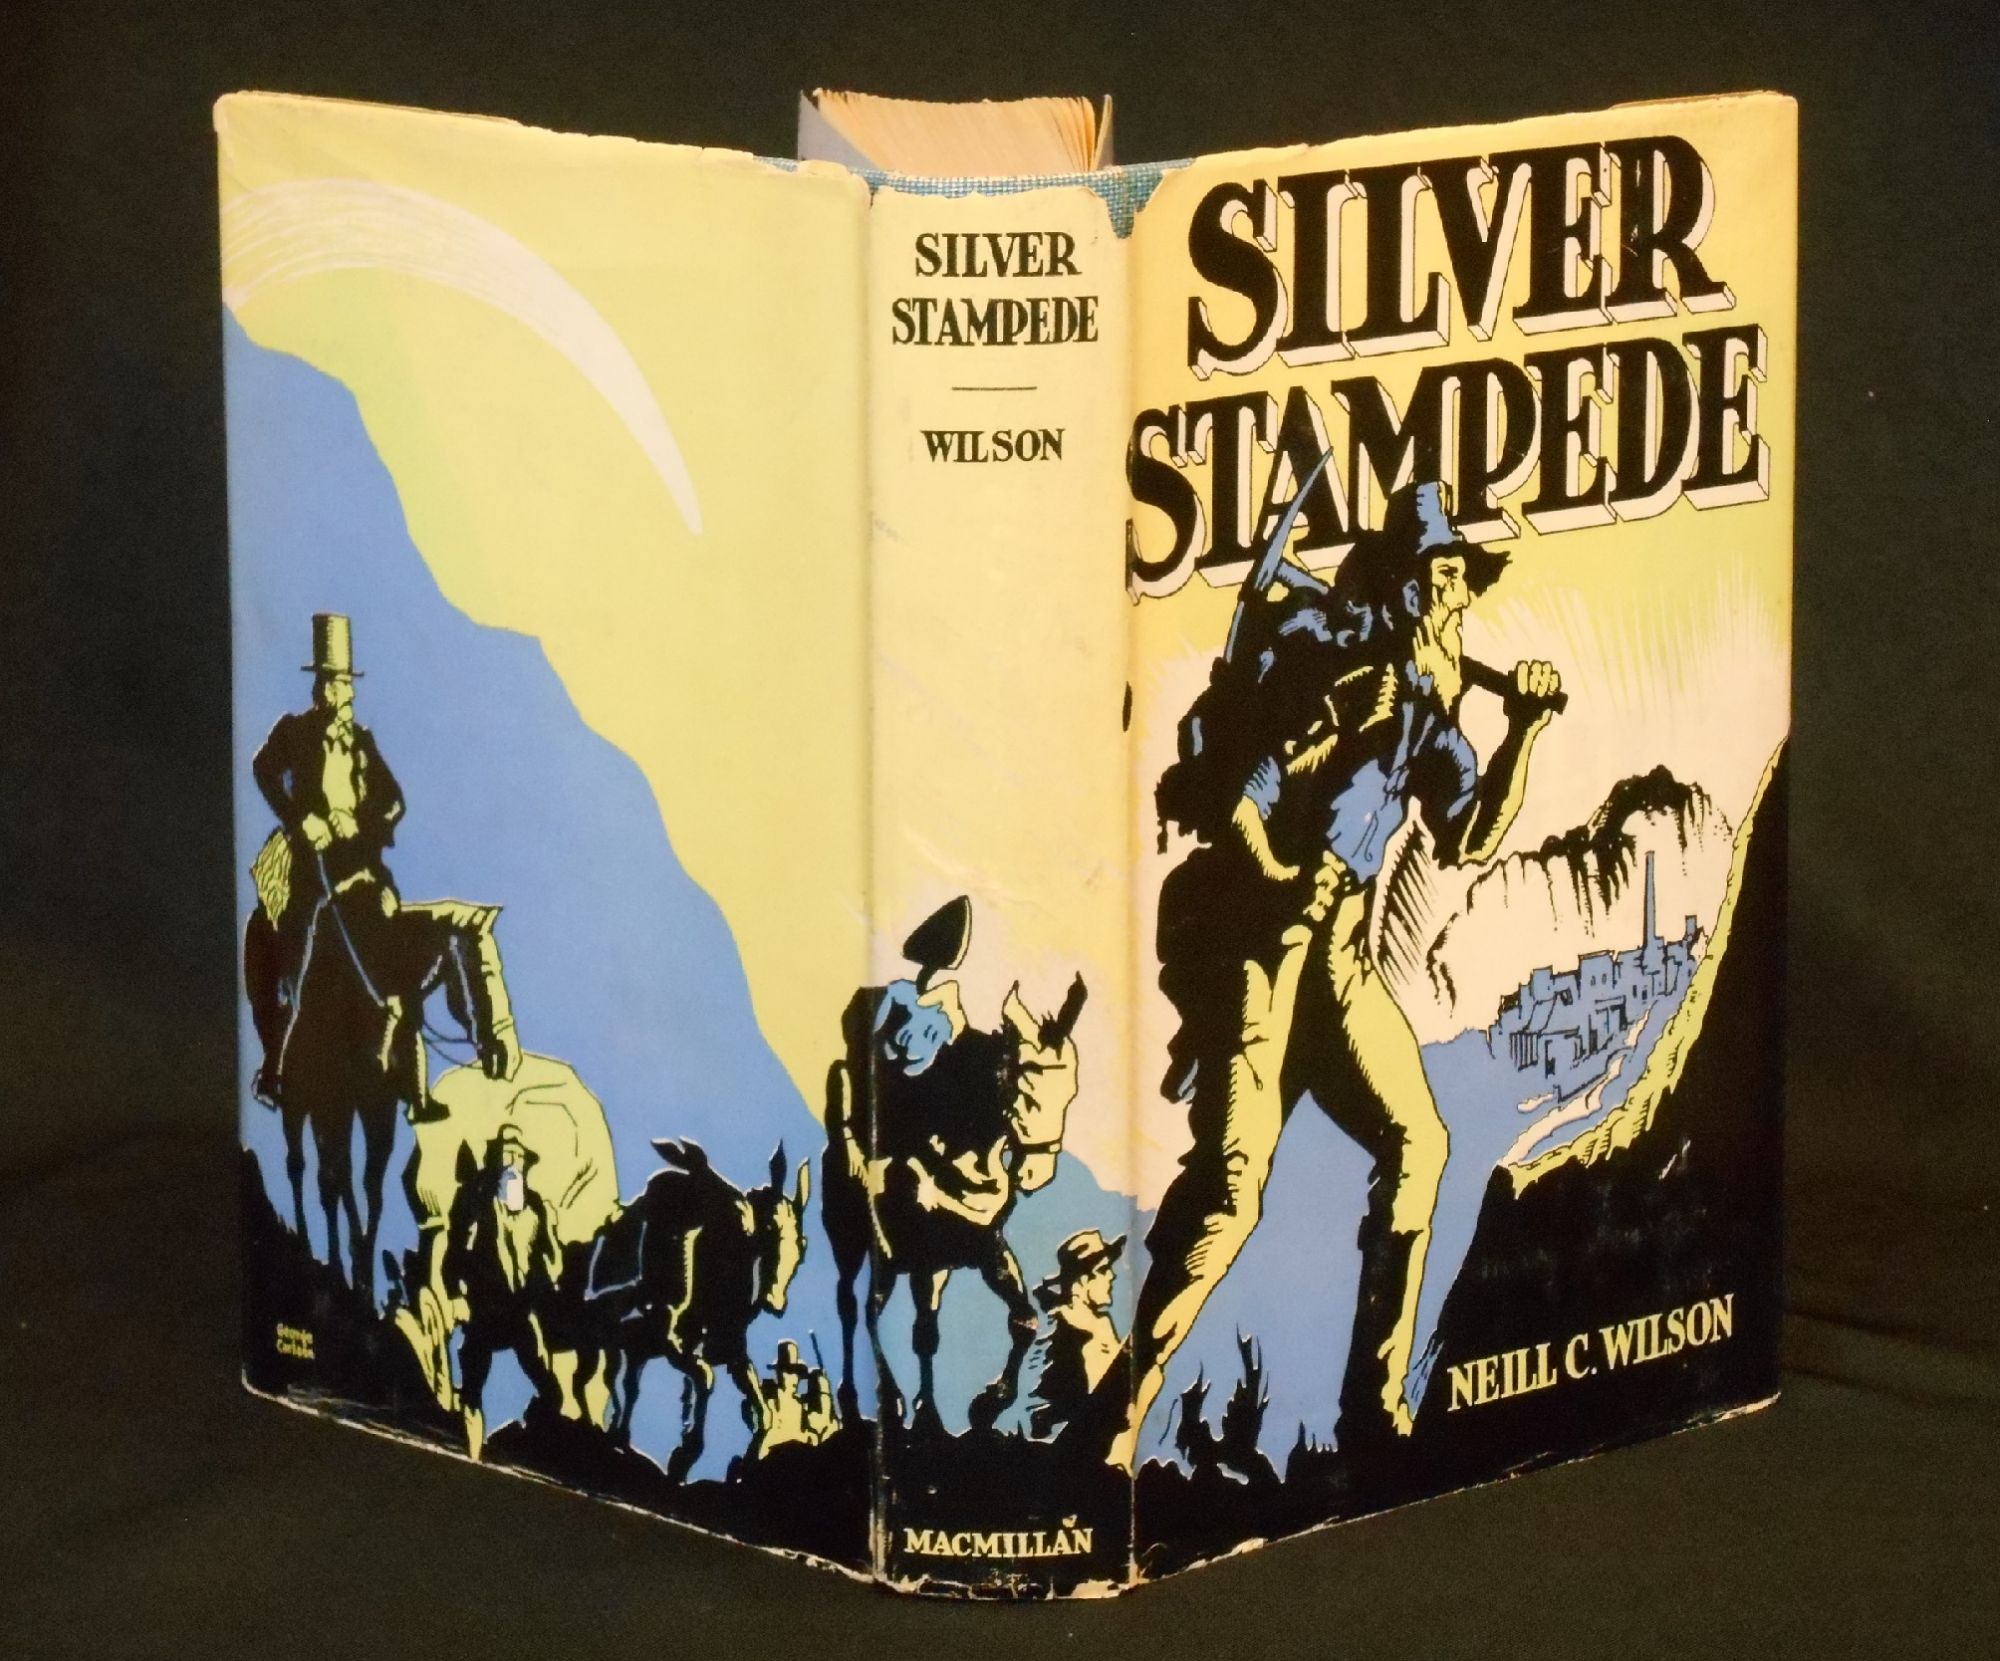 Silver Stampede; The Career of Death Valley's Hell-Camp, Old Panamint - Wilson, Neill C.; Burbank, E.A. (Illustrations); Moulin, Gabriel (Photographs); Moulin, Raymond (Photographs); Carlson, George (Dust Jacket Art)